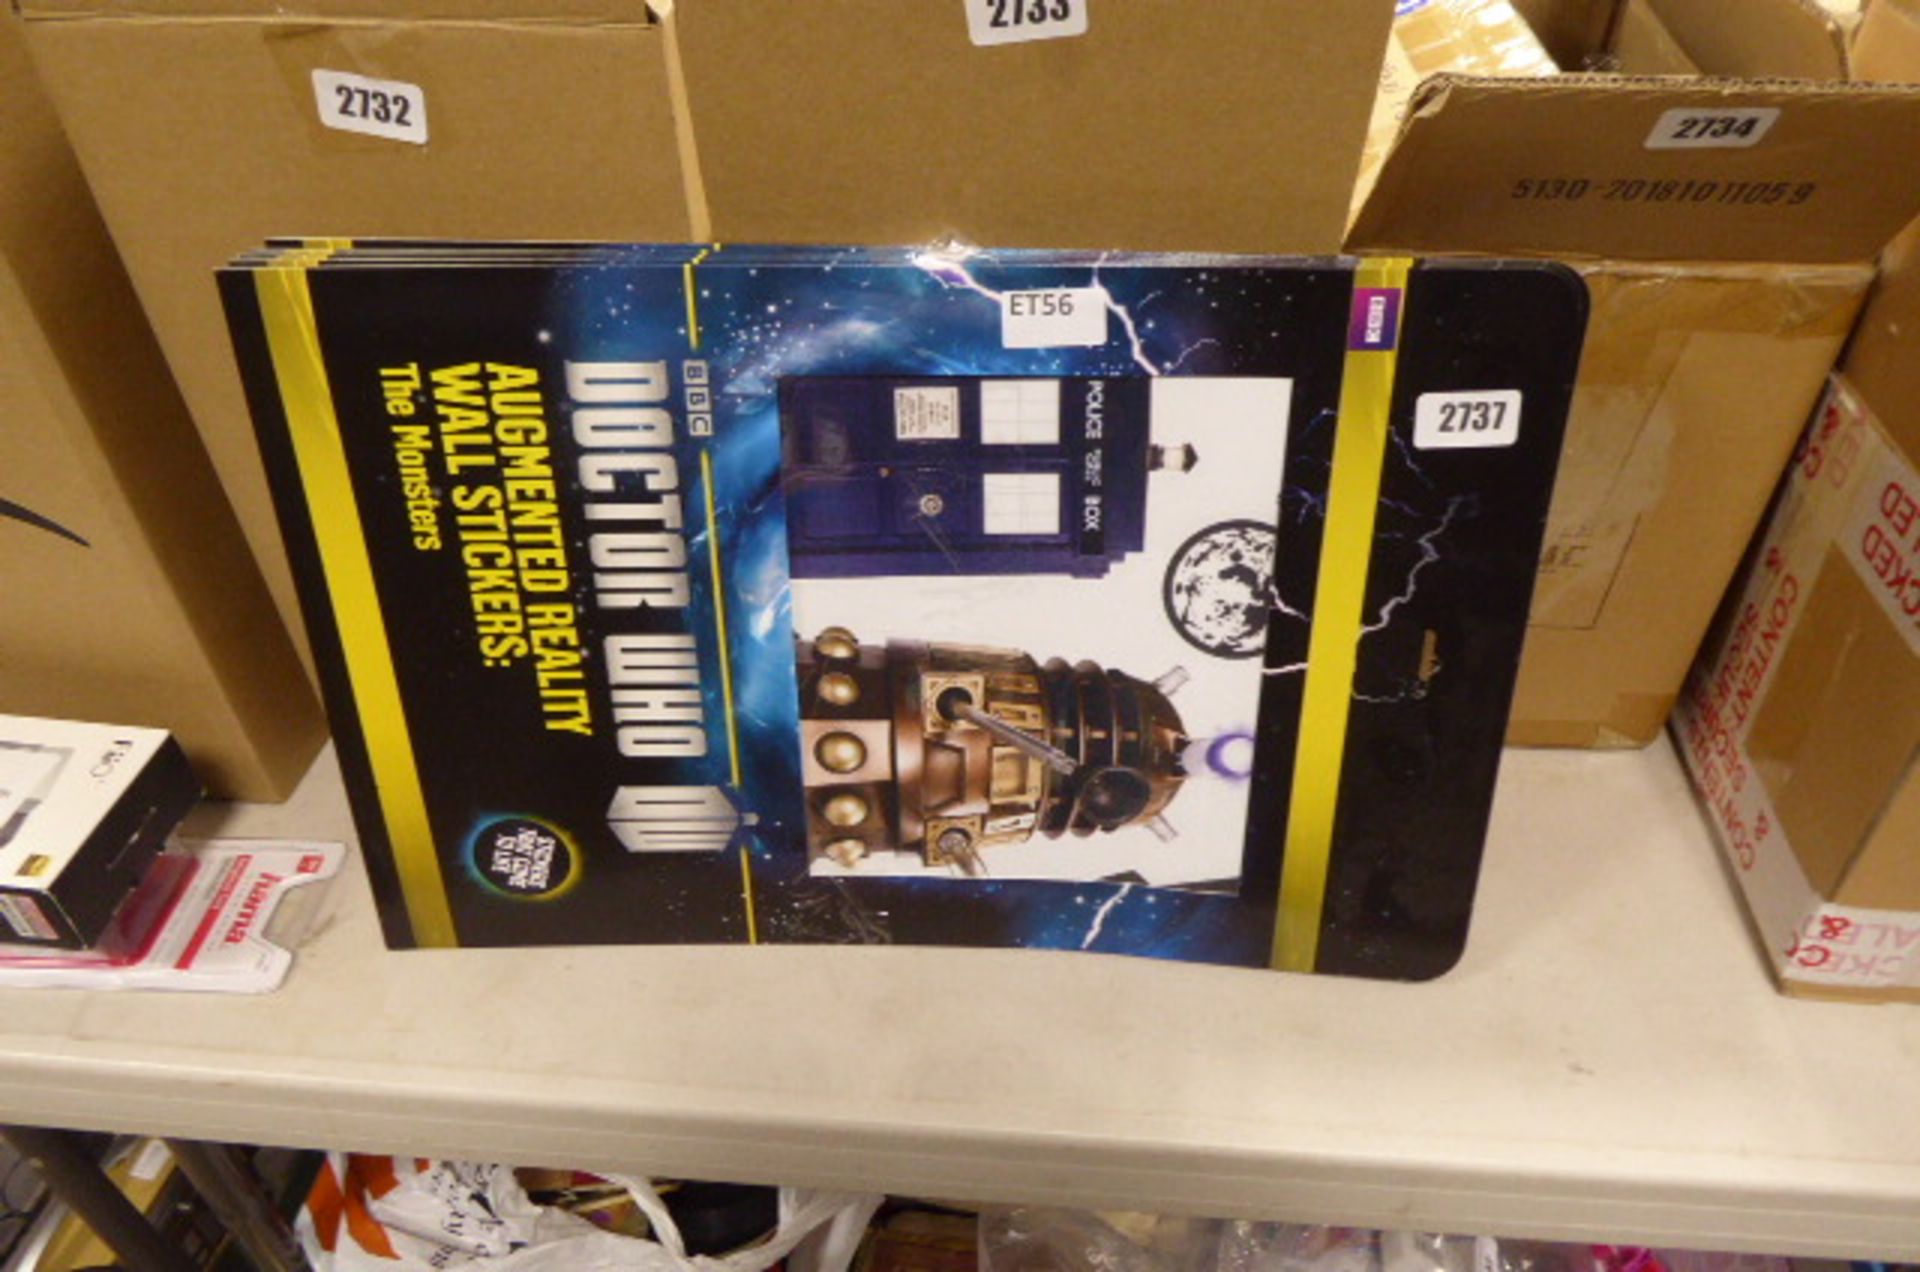 Dr Who wall augmented reality stickers